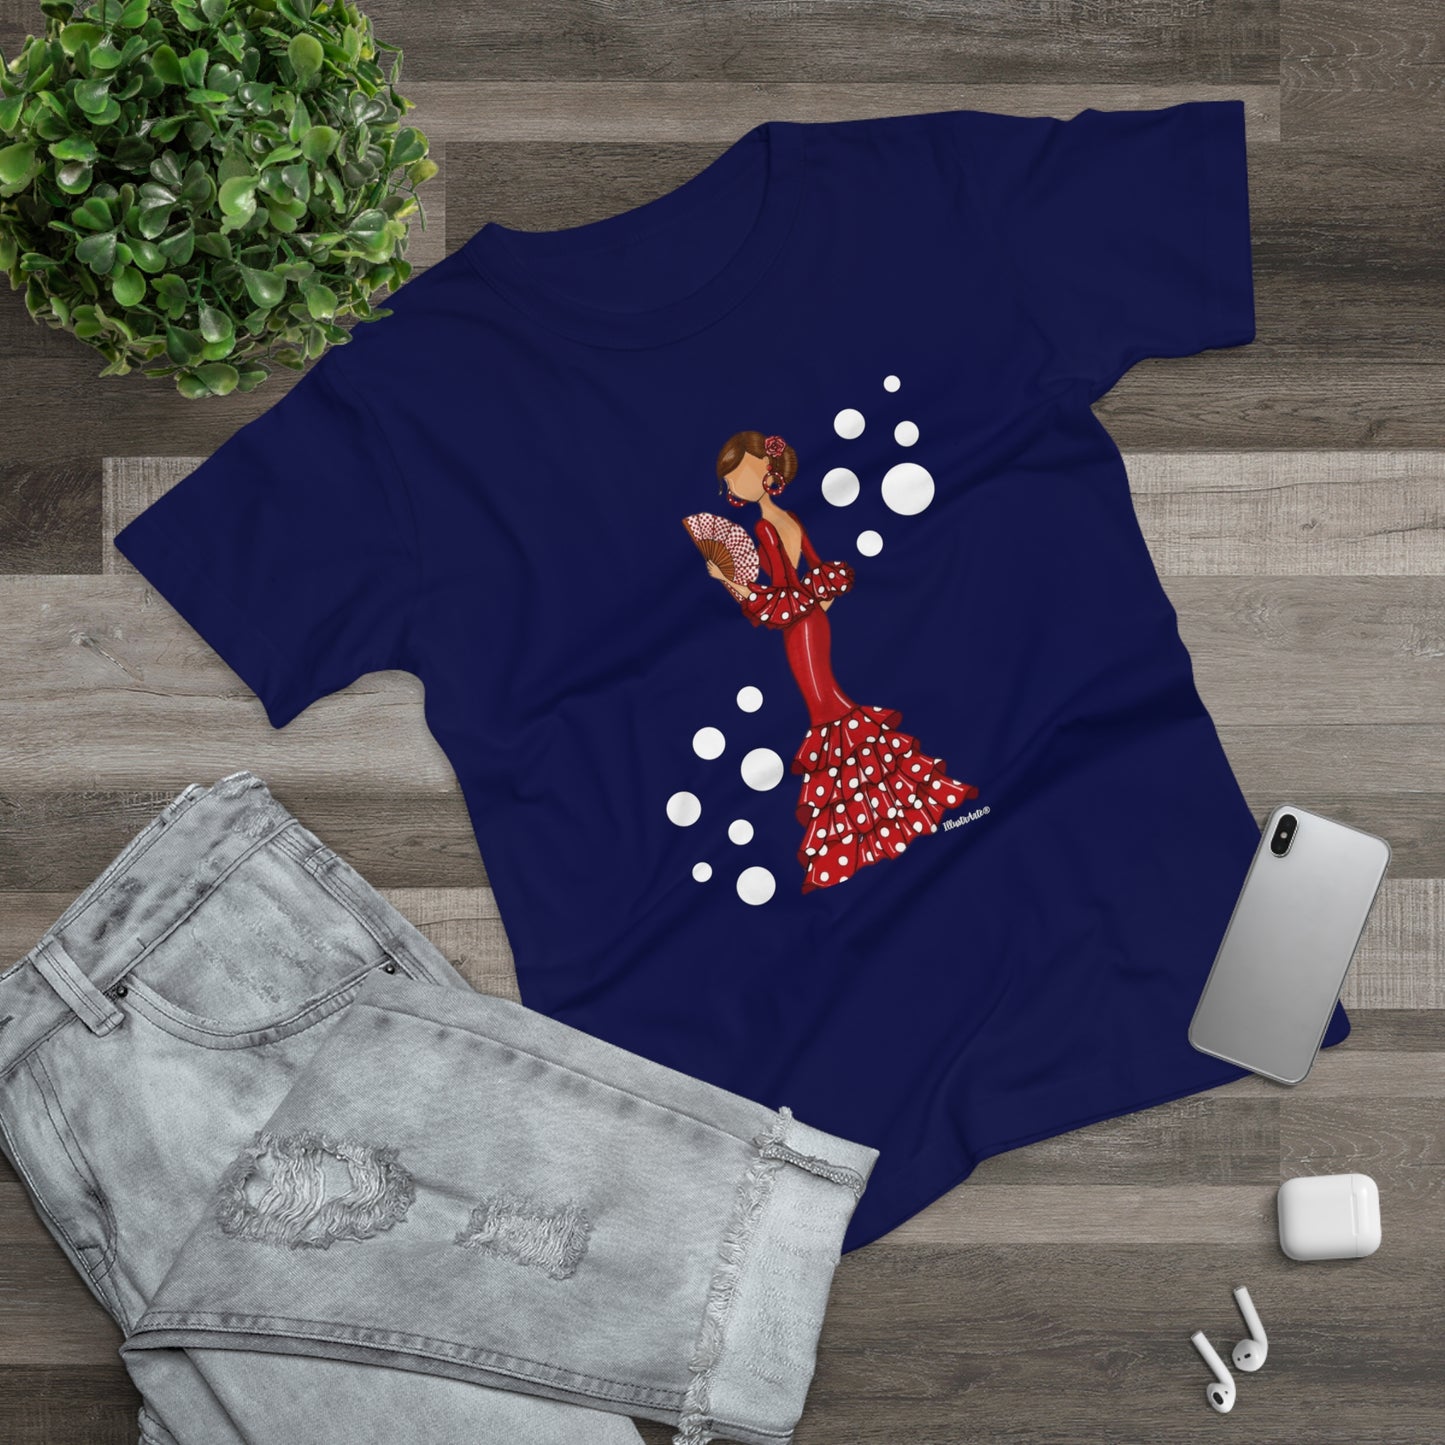 a t - shirt with a picture of a woman in a polka dot dress